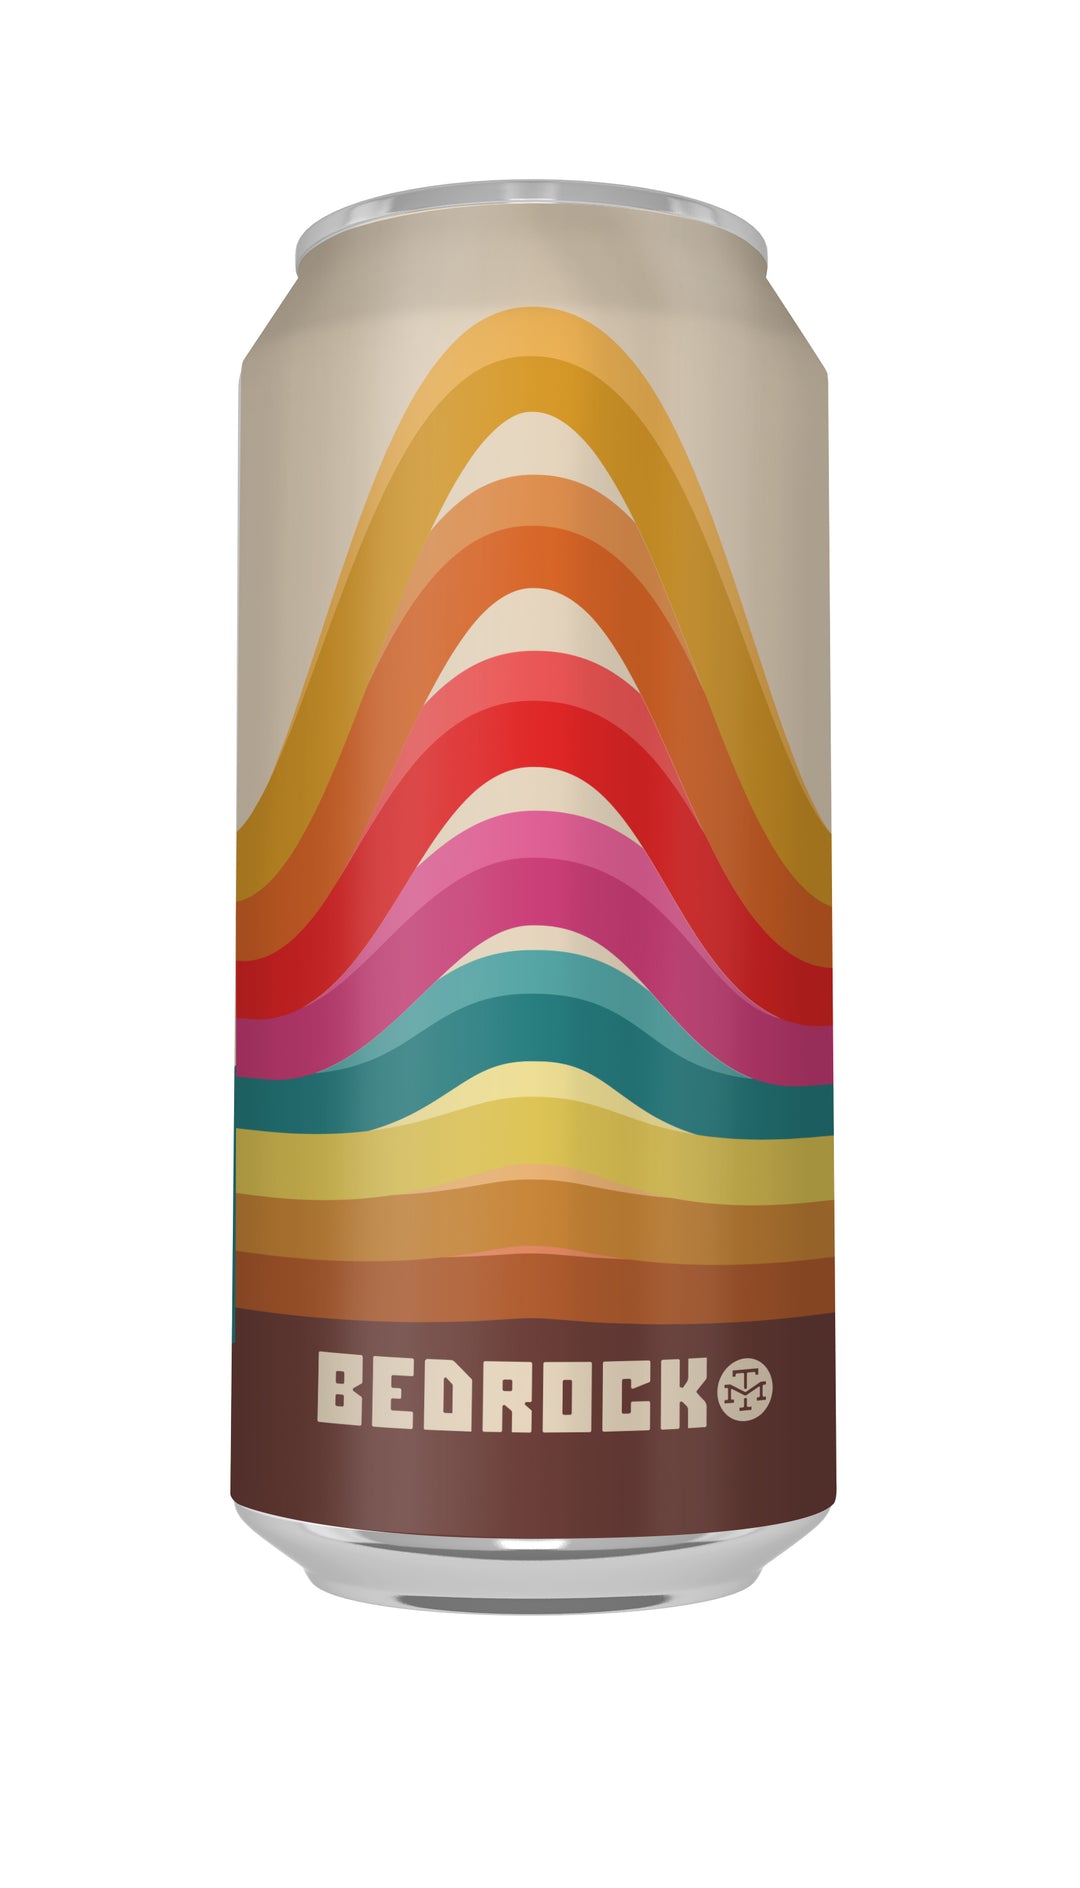 Modern Times Bedrock 4 pack cans